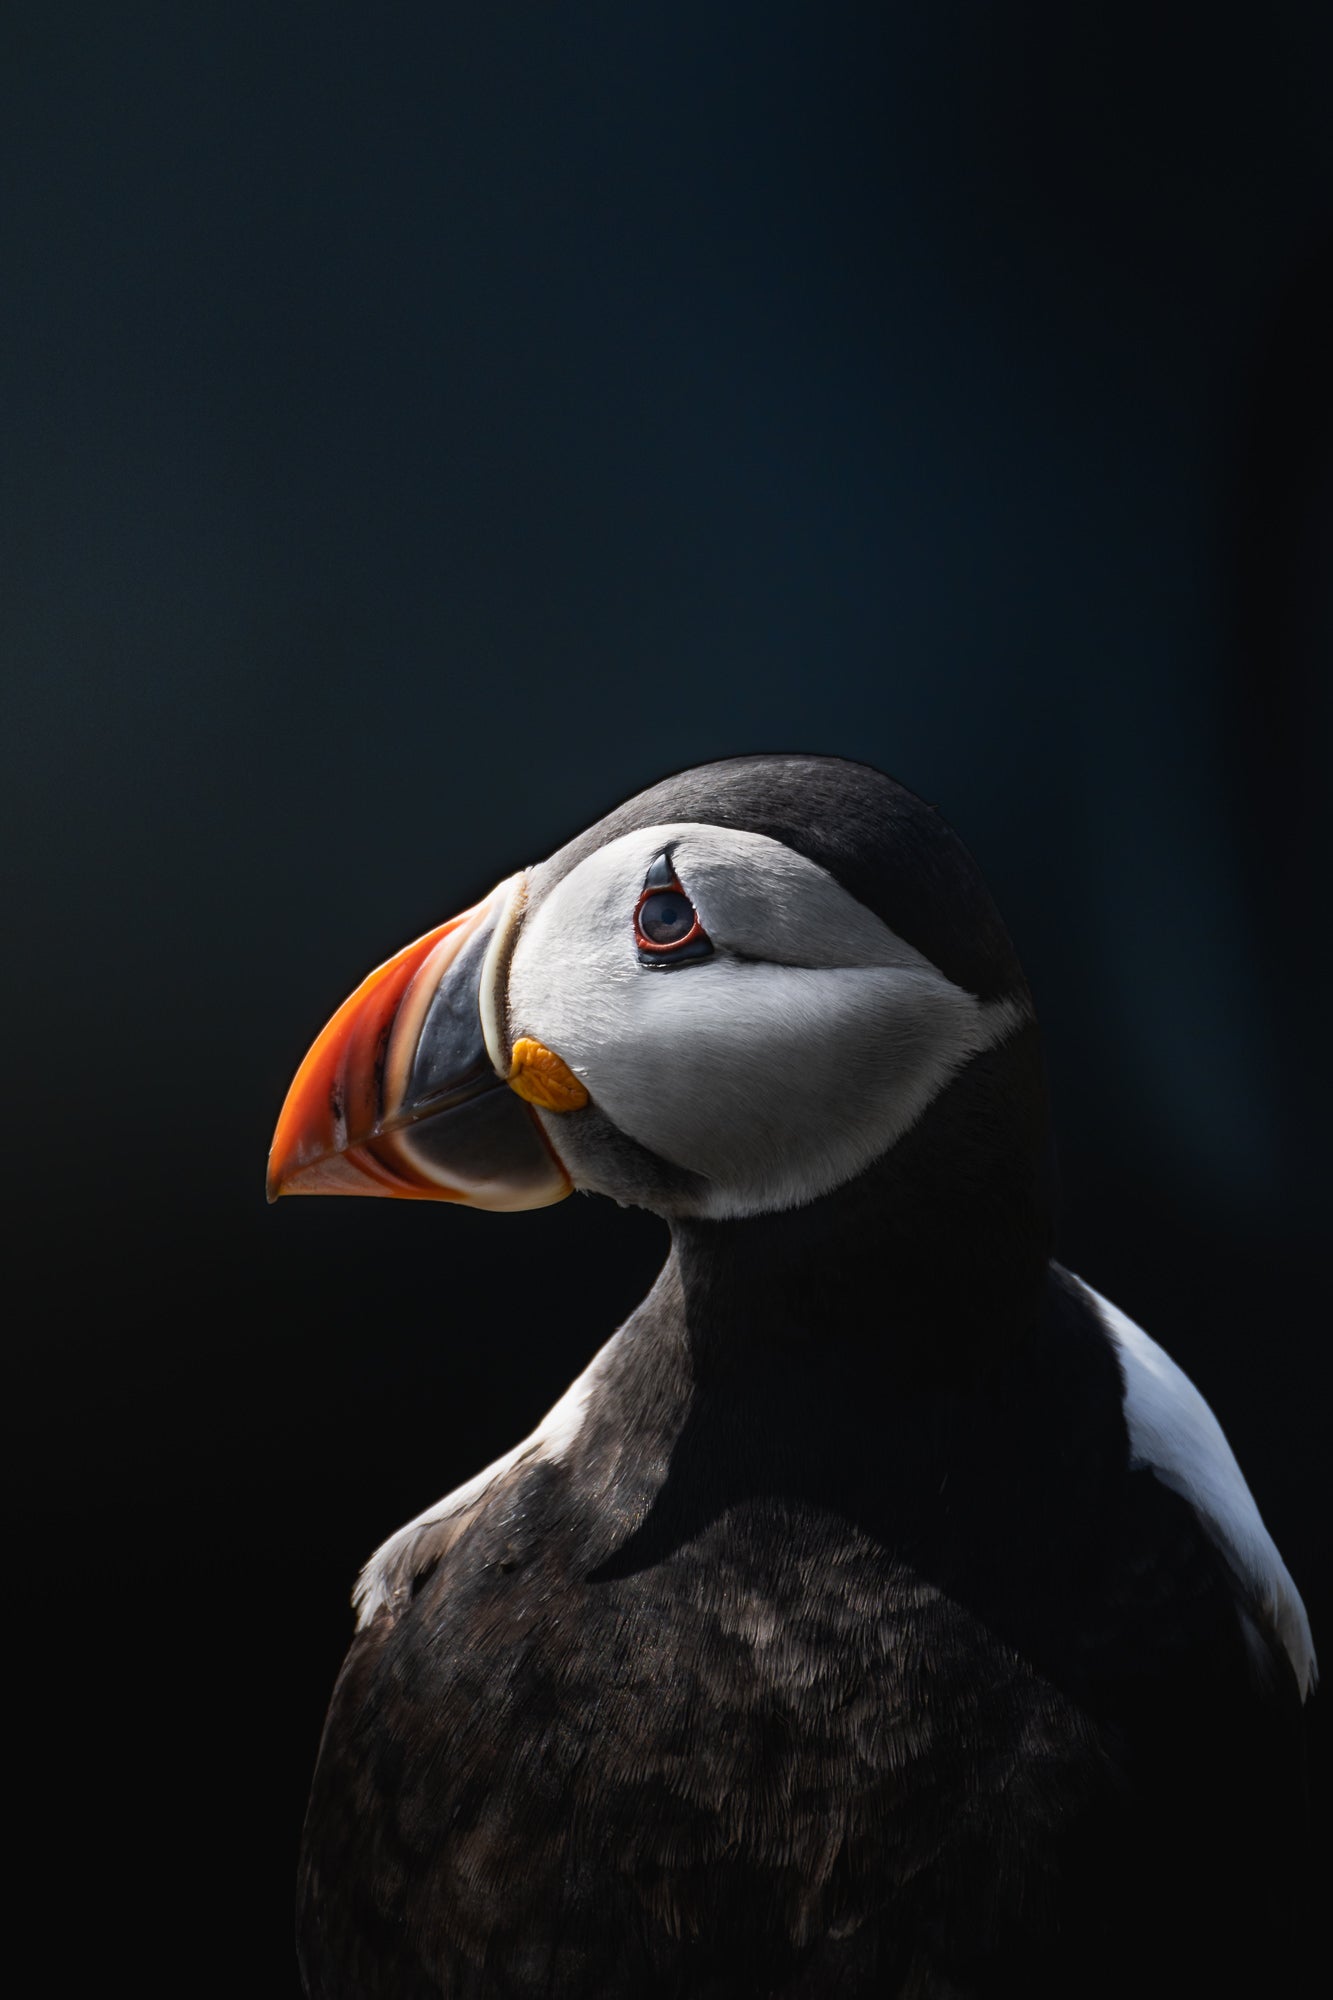 “Atlantic Puffin, using the extra reach to get a portrait of the beautiful puffin.”
Photo by Daryl Scott Walker. Sony Alpha 7 III. Sony 100-400mm f/4.5-5.6 G Master + 2X Teleconverter. 1/400-sec, f/11, ISO 250